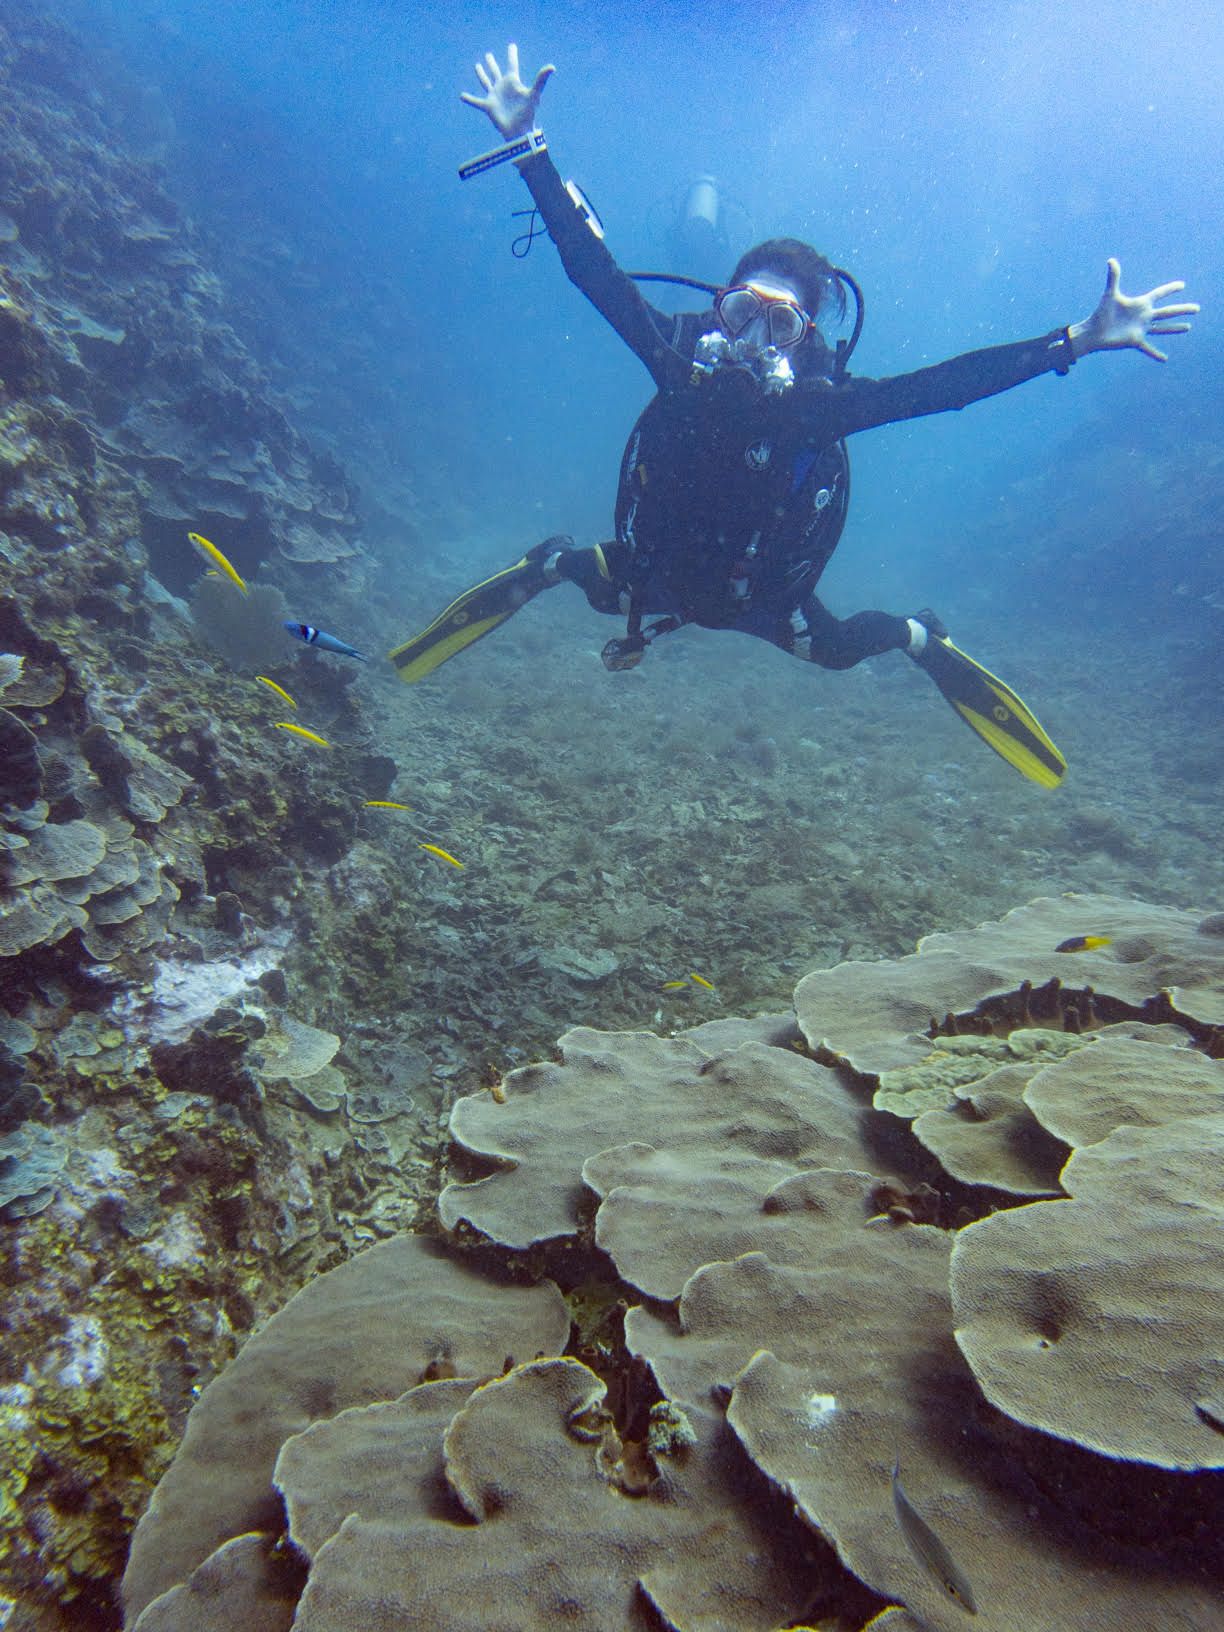 Berwald floating near the reef in scuba gear, legs and arms outstretched starfish-style.